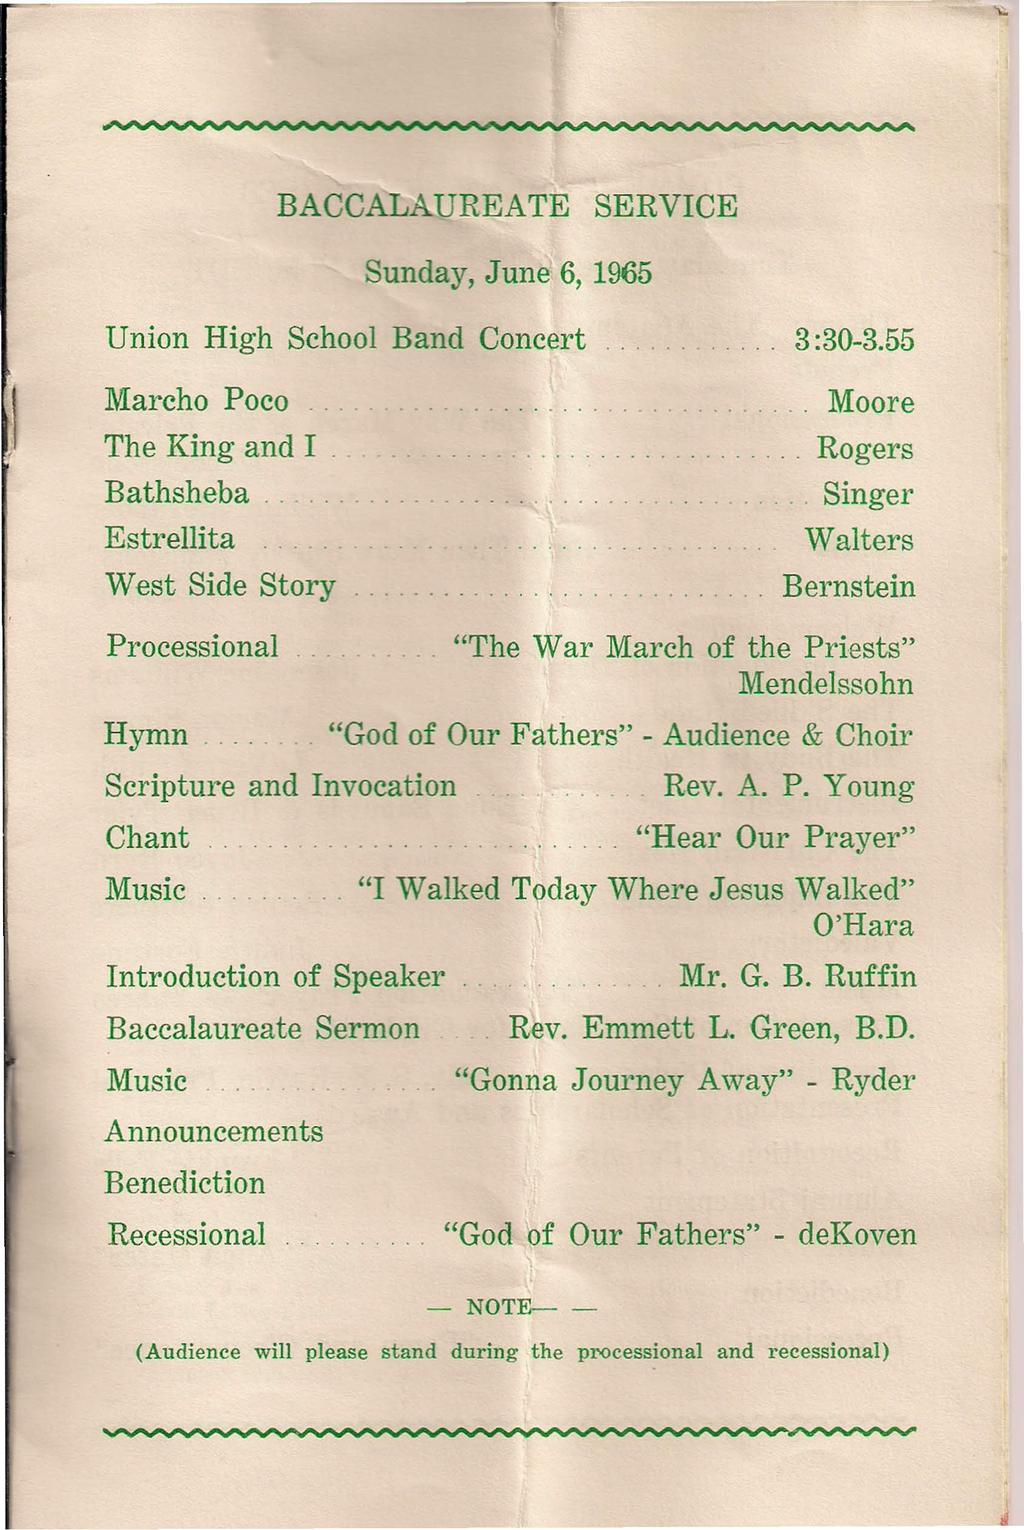 BACCALAUREATE SERVICE Sunday, June 6, 1965 Union High School Band Concert 3:30-3.55 Marcho Poco....... Moore The King and I. Bathsheba... _. Rogers Singer Estrellita.... VValters VV stside Story.